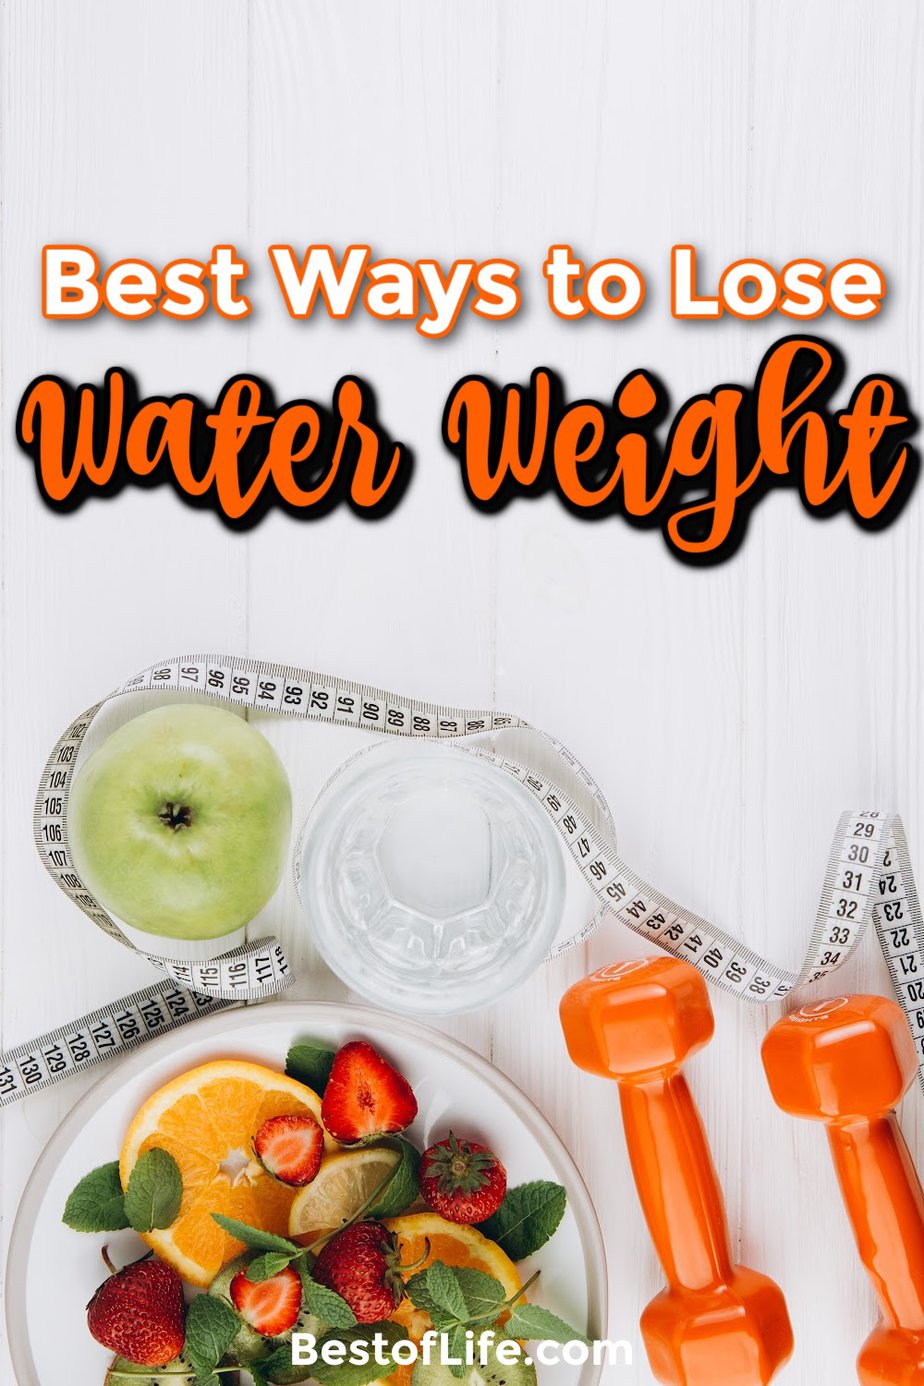 The best ways to lose water weight will help you shed those annoying pounds that keep you from feeling and looking your best. How to Lose Weight | What is Water Weight | Weight Loss Tips | Easy Fitness Tips | Healthy Living | Losing Water Weight | Lose 3 Pounds | Losing Weight Naturally | Safe Weight Loss Ideas #weightloss #healthyliving